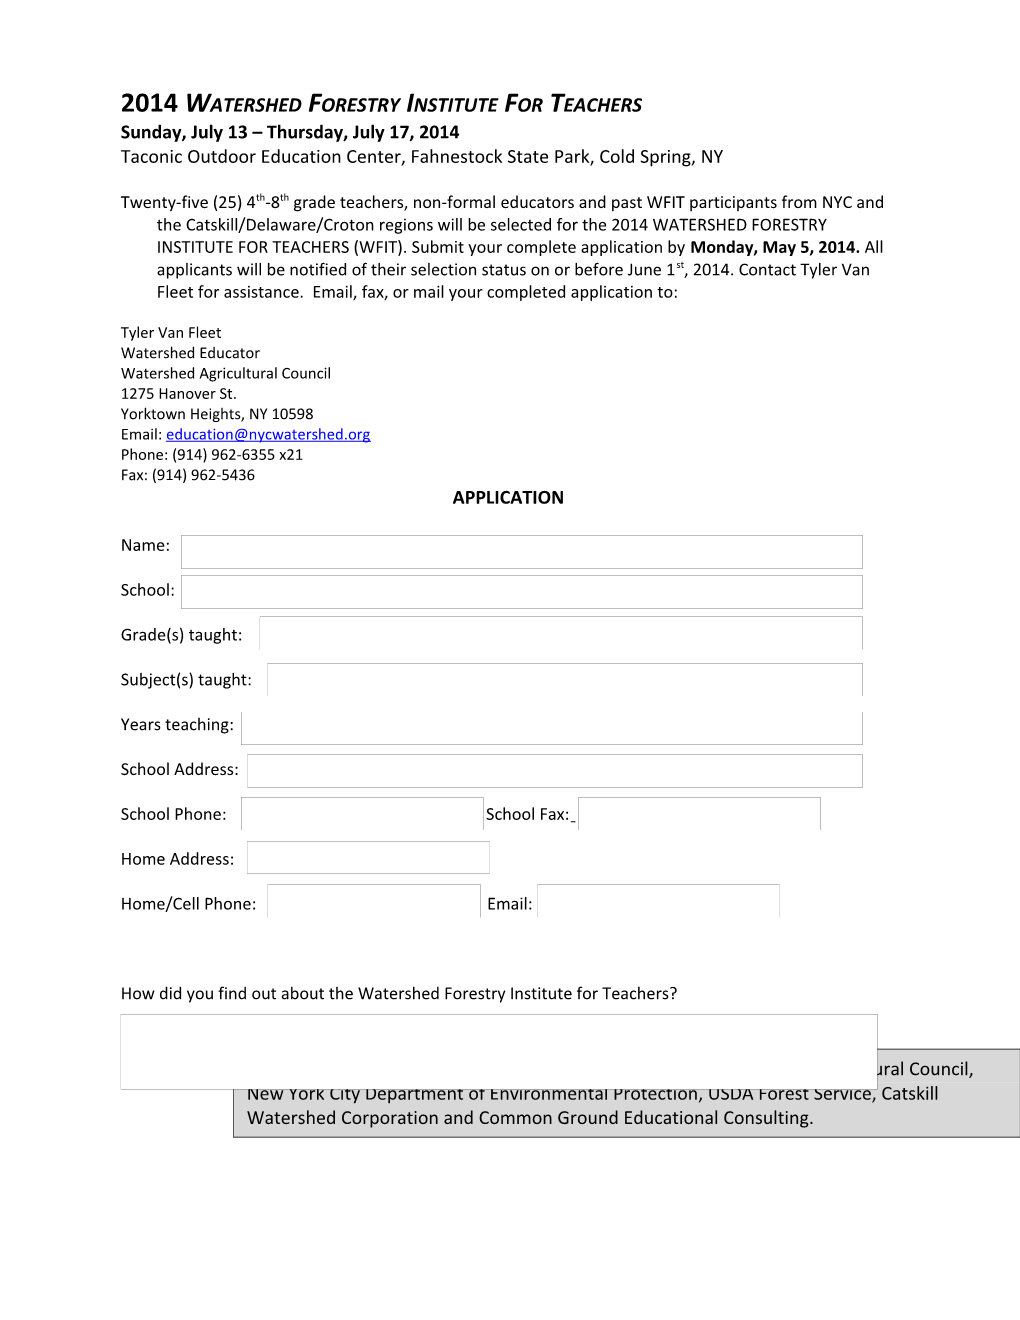 2002 2003 GREEN CONNECTIONS Application Form